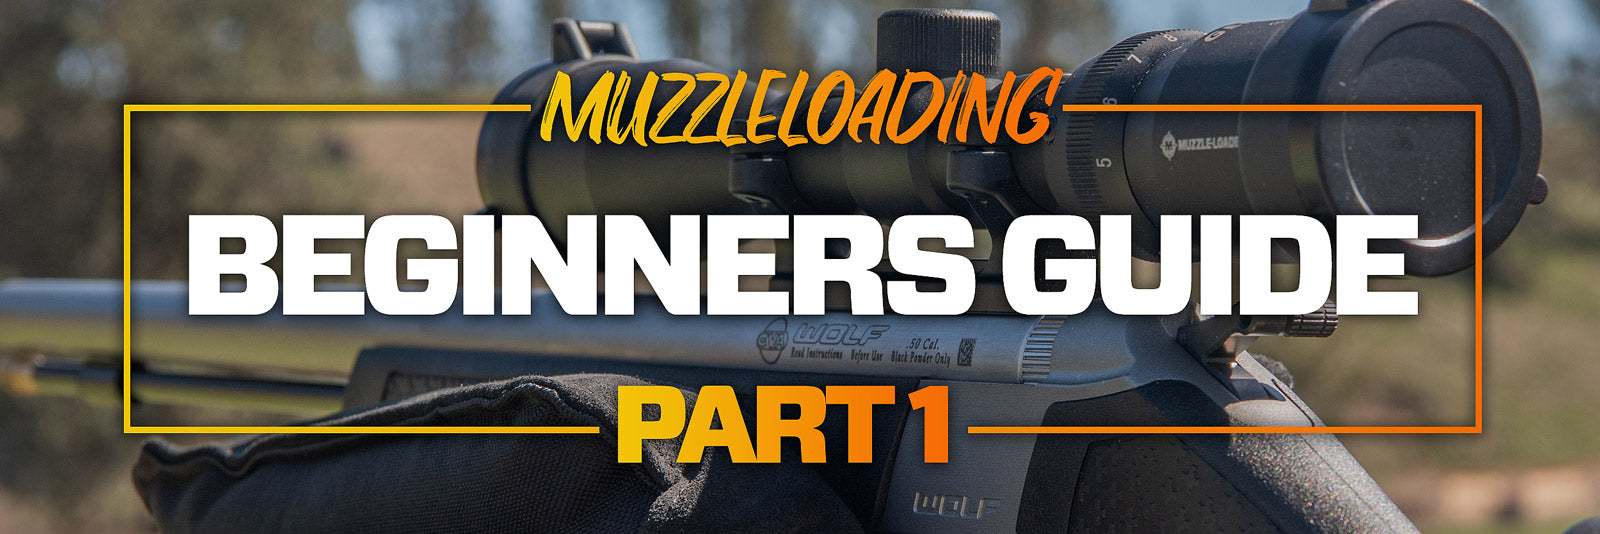 Getting Started Muzzleloader Hunting On A Budget - The Beginners Guide To Muzzleloading Series - Part 1